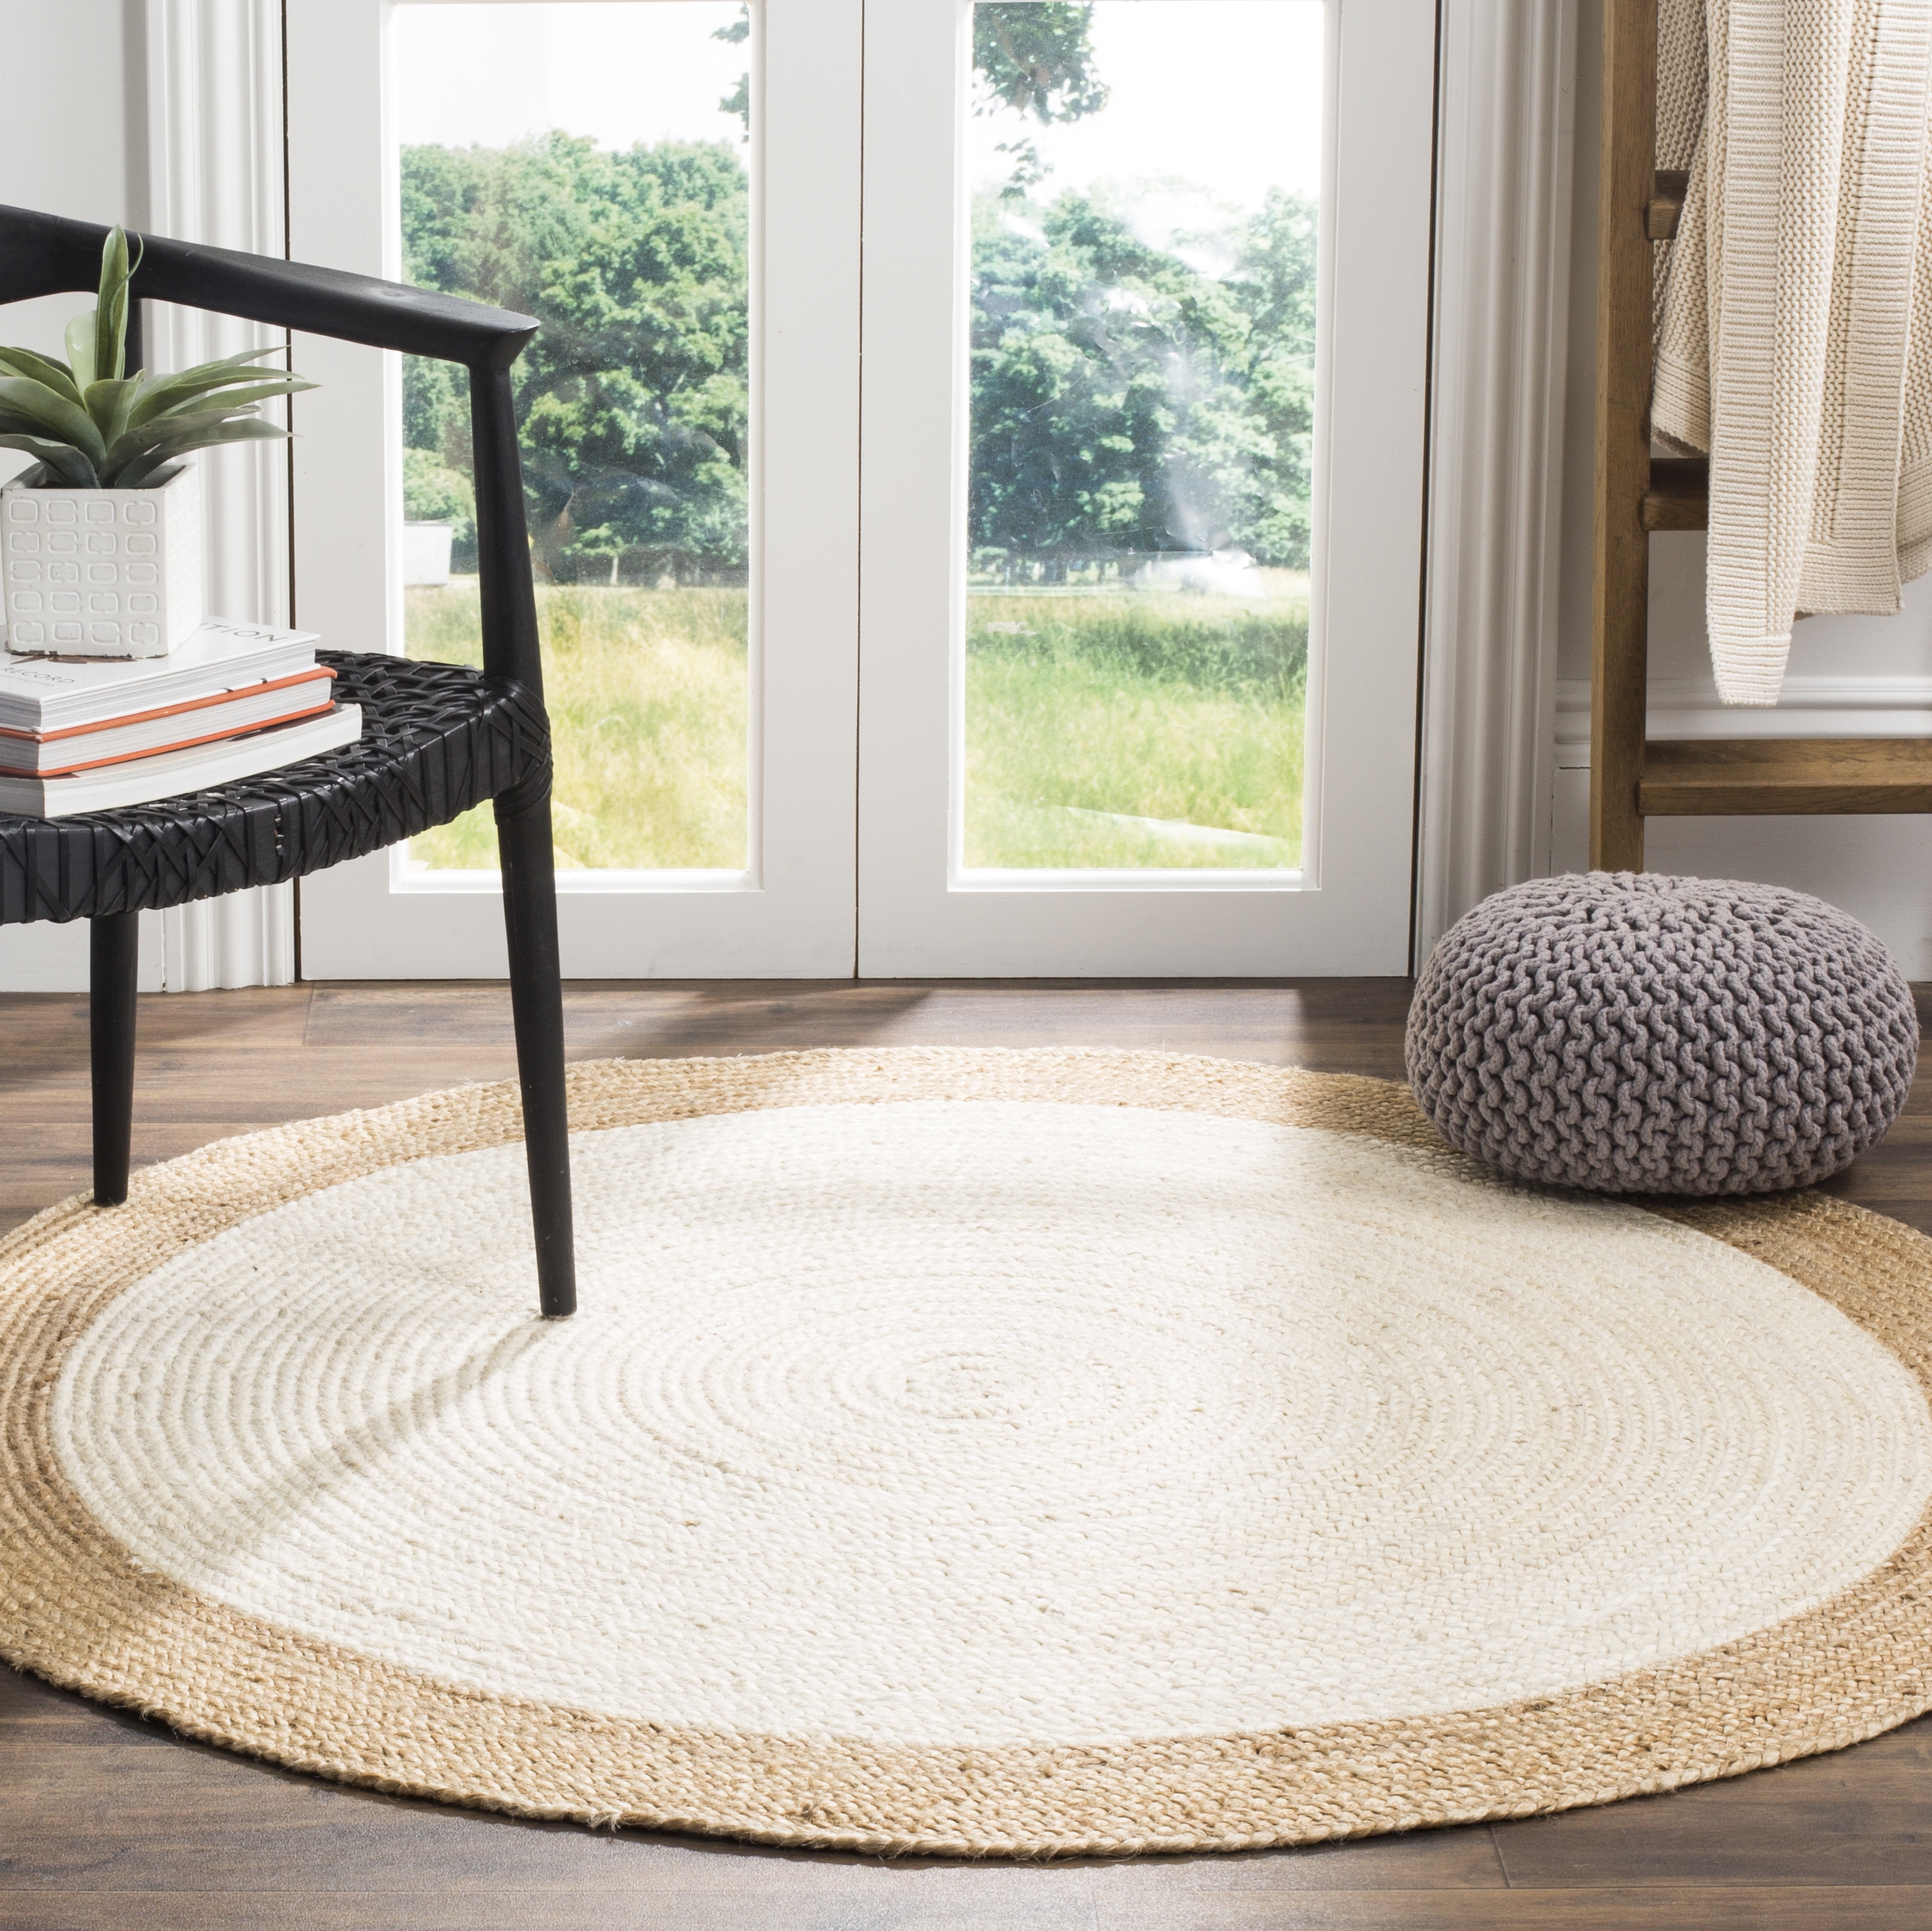 Arlo Home Hand Woven Area Rug, NF801M, Ivory/Natural,  5' X 5' Round - Image 1